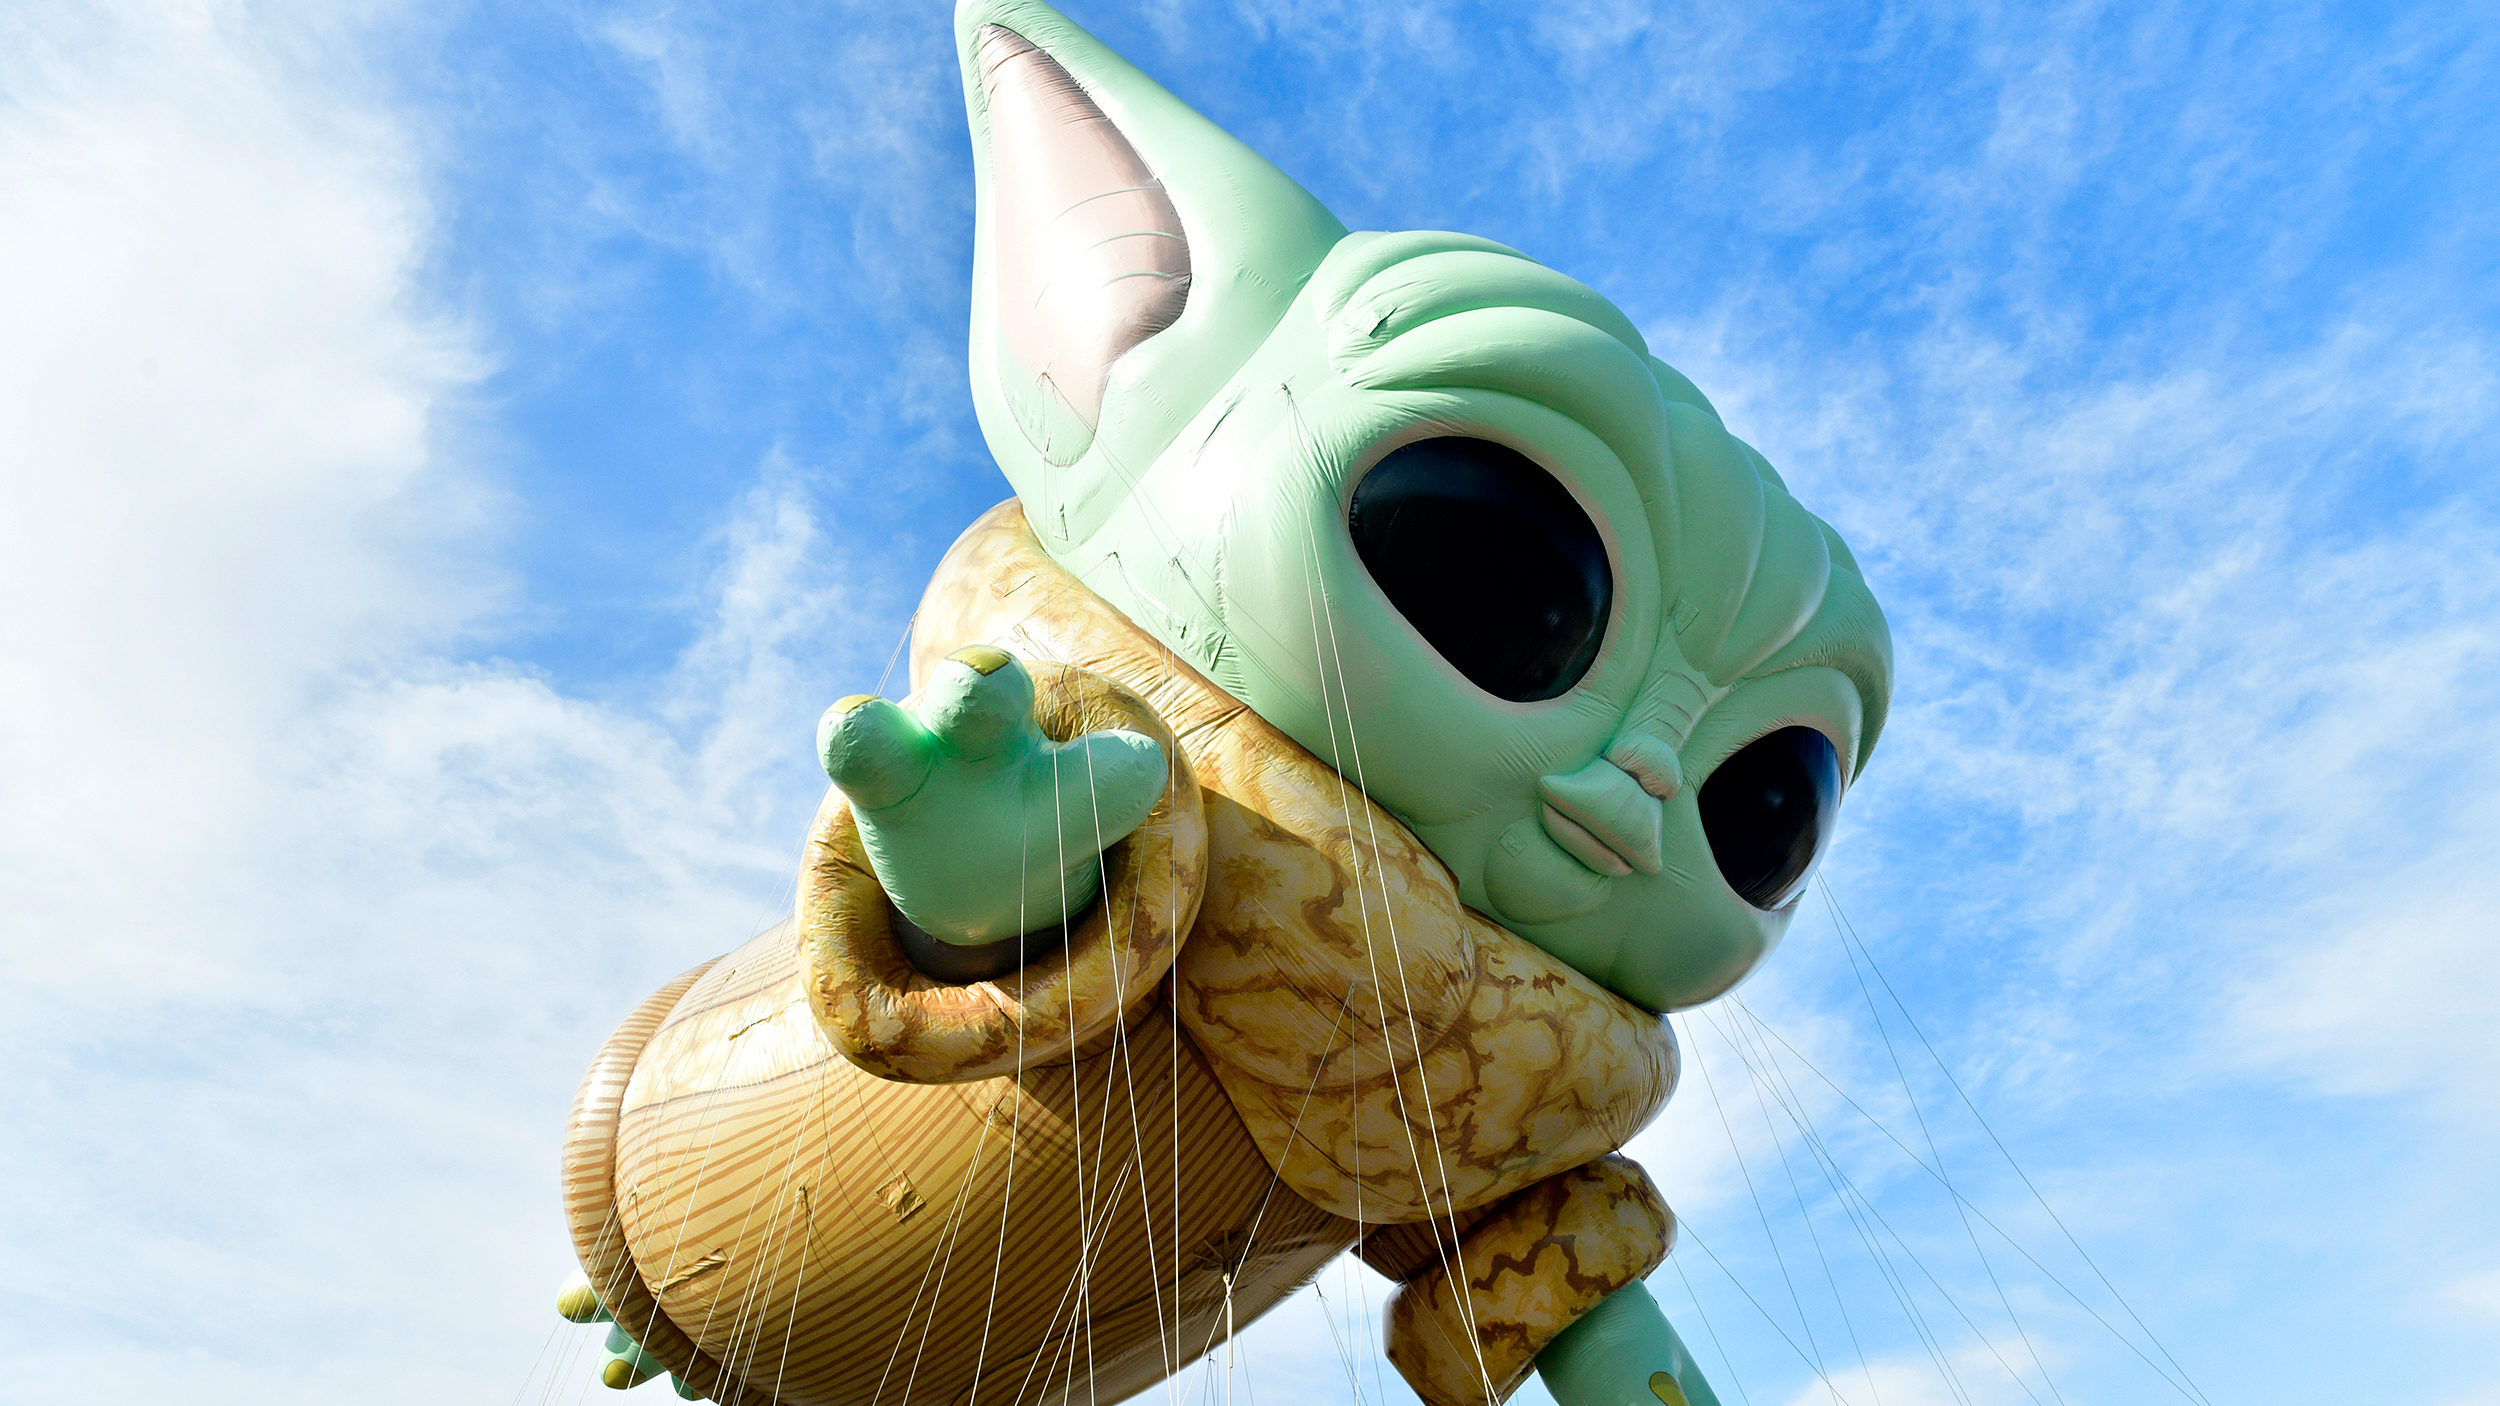 NEW YORK, NEW YORK - NOVEMBER 13: Macy's unveils new giant character balloons for the 95th Annual M...